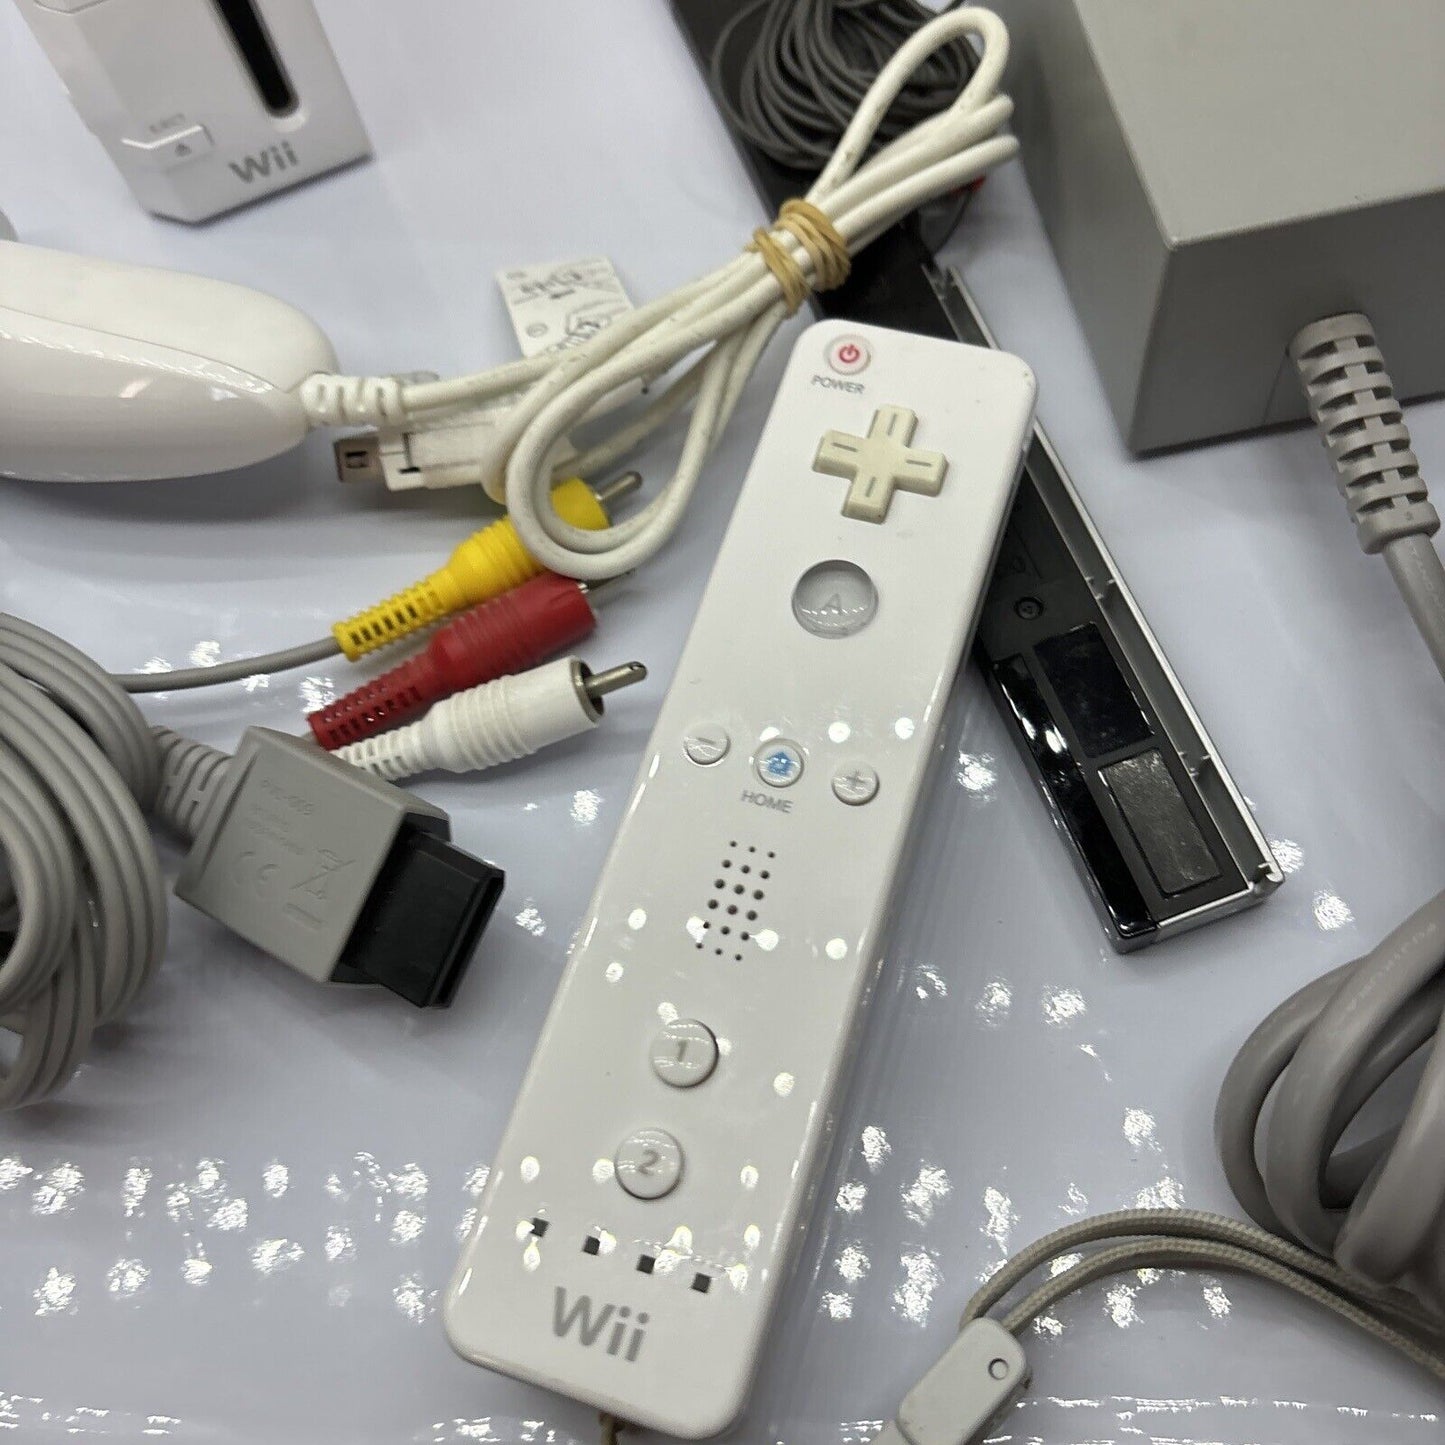 Nintendo Wii Console RVL-001(AUS) With 1 Controller & Nunchuck Game